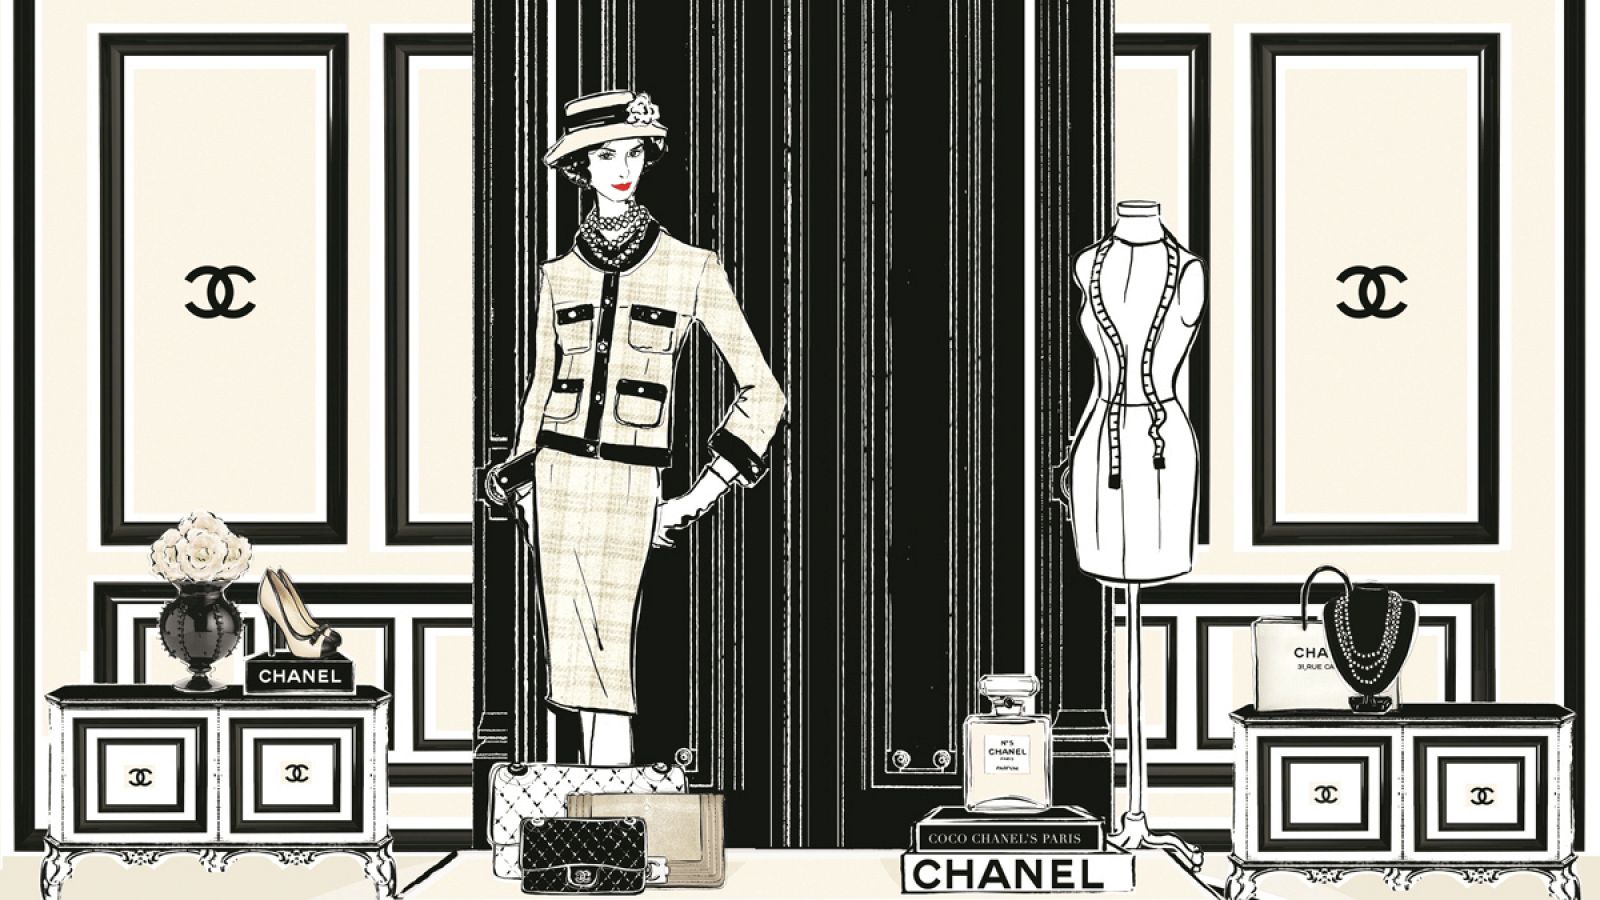 Coco Chanel by Megan Hess